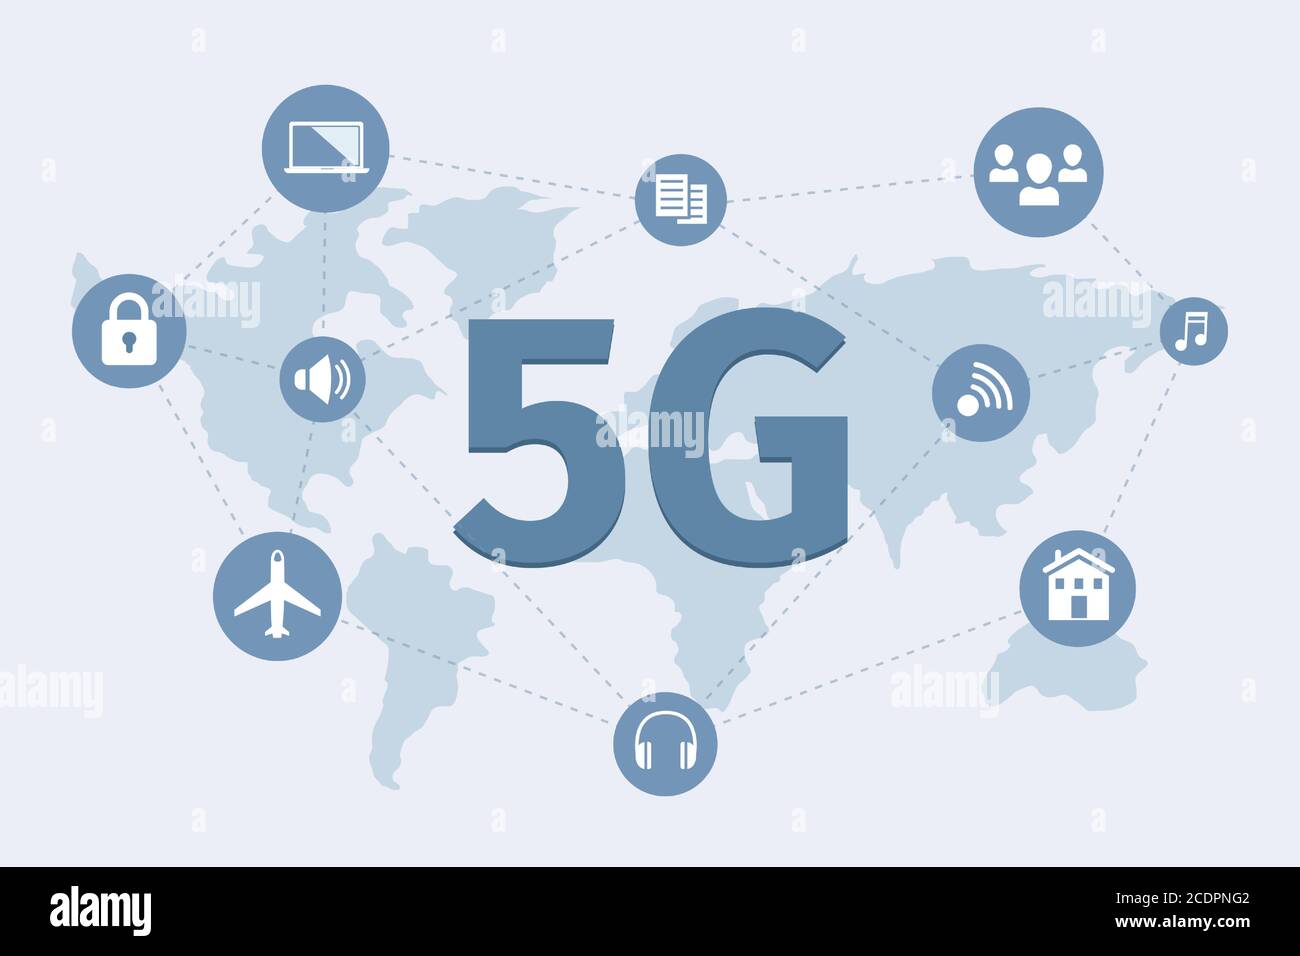 5G network wireless technology spreading over the world vector flat banner concept. High speed 5G technology for people, aviation, sharing document and multimedia, smart city poster design. Stock Vector